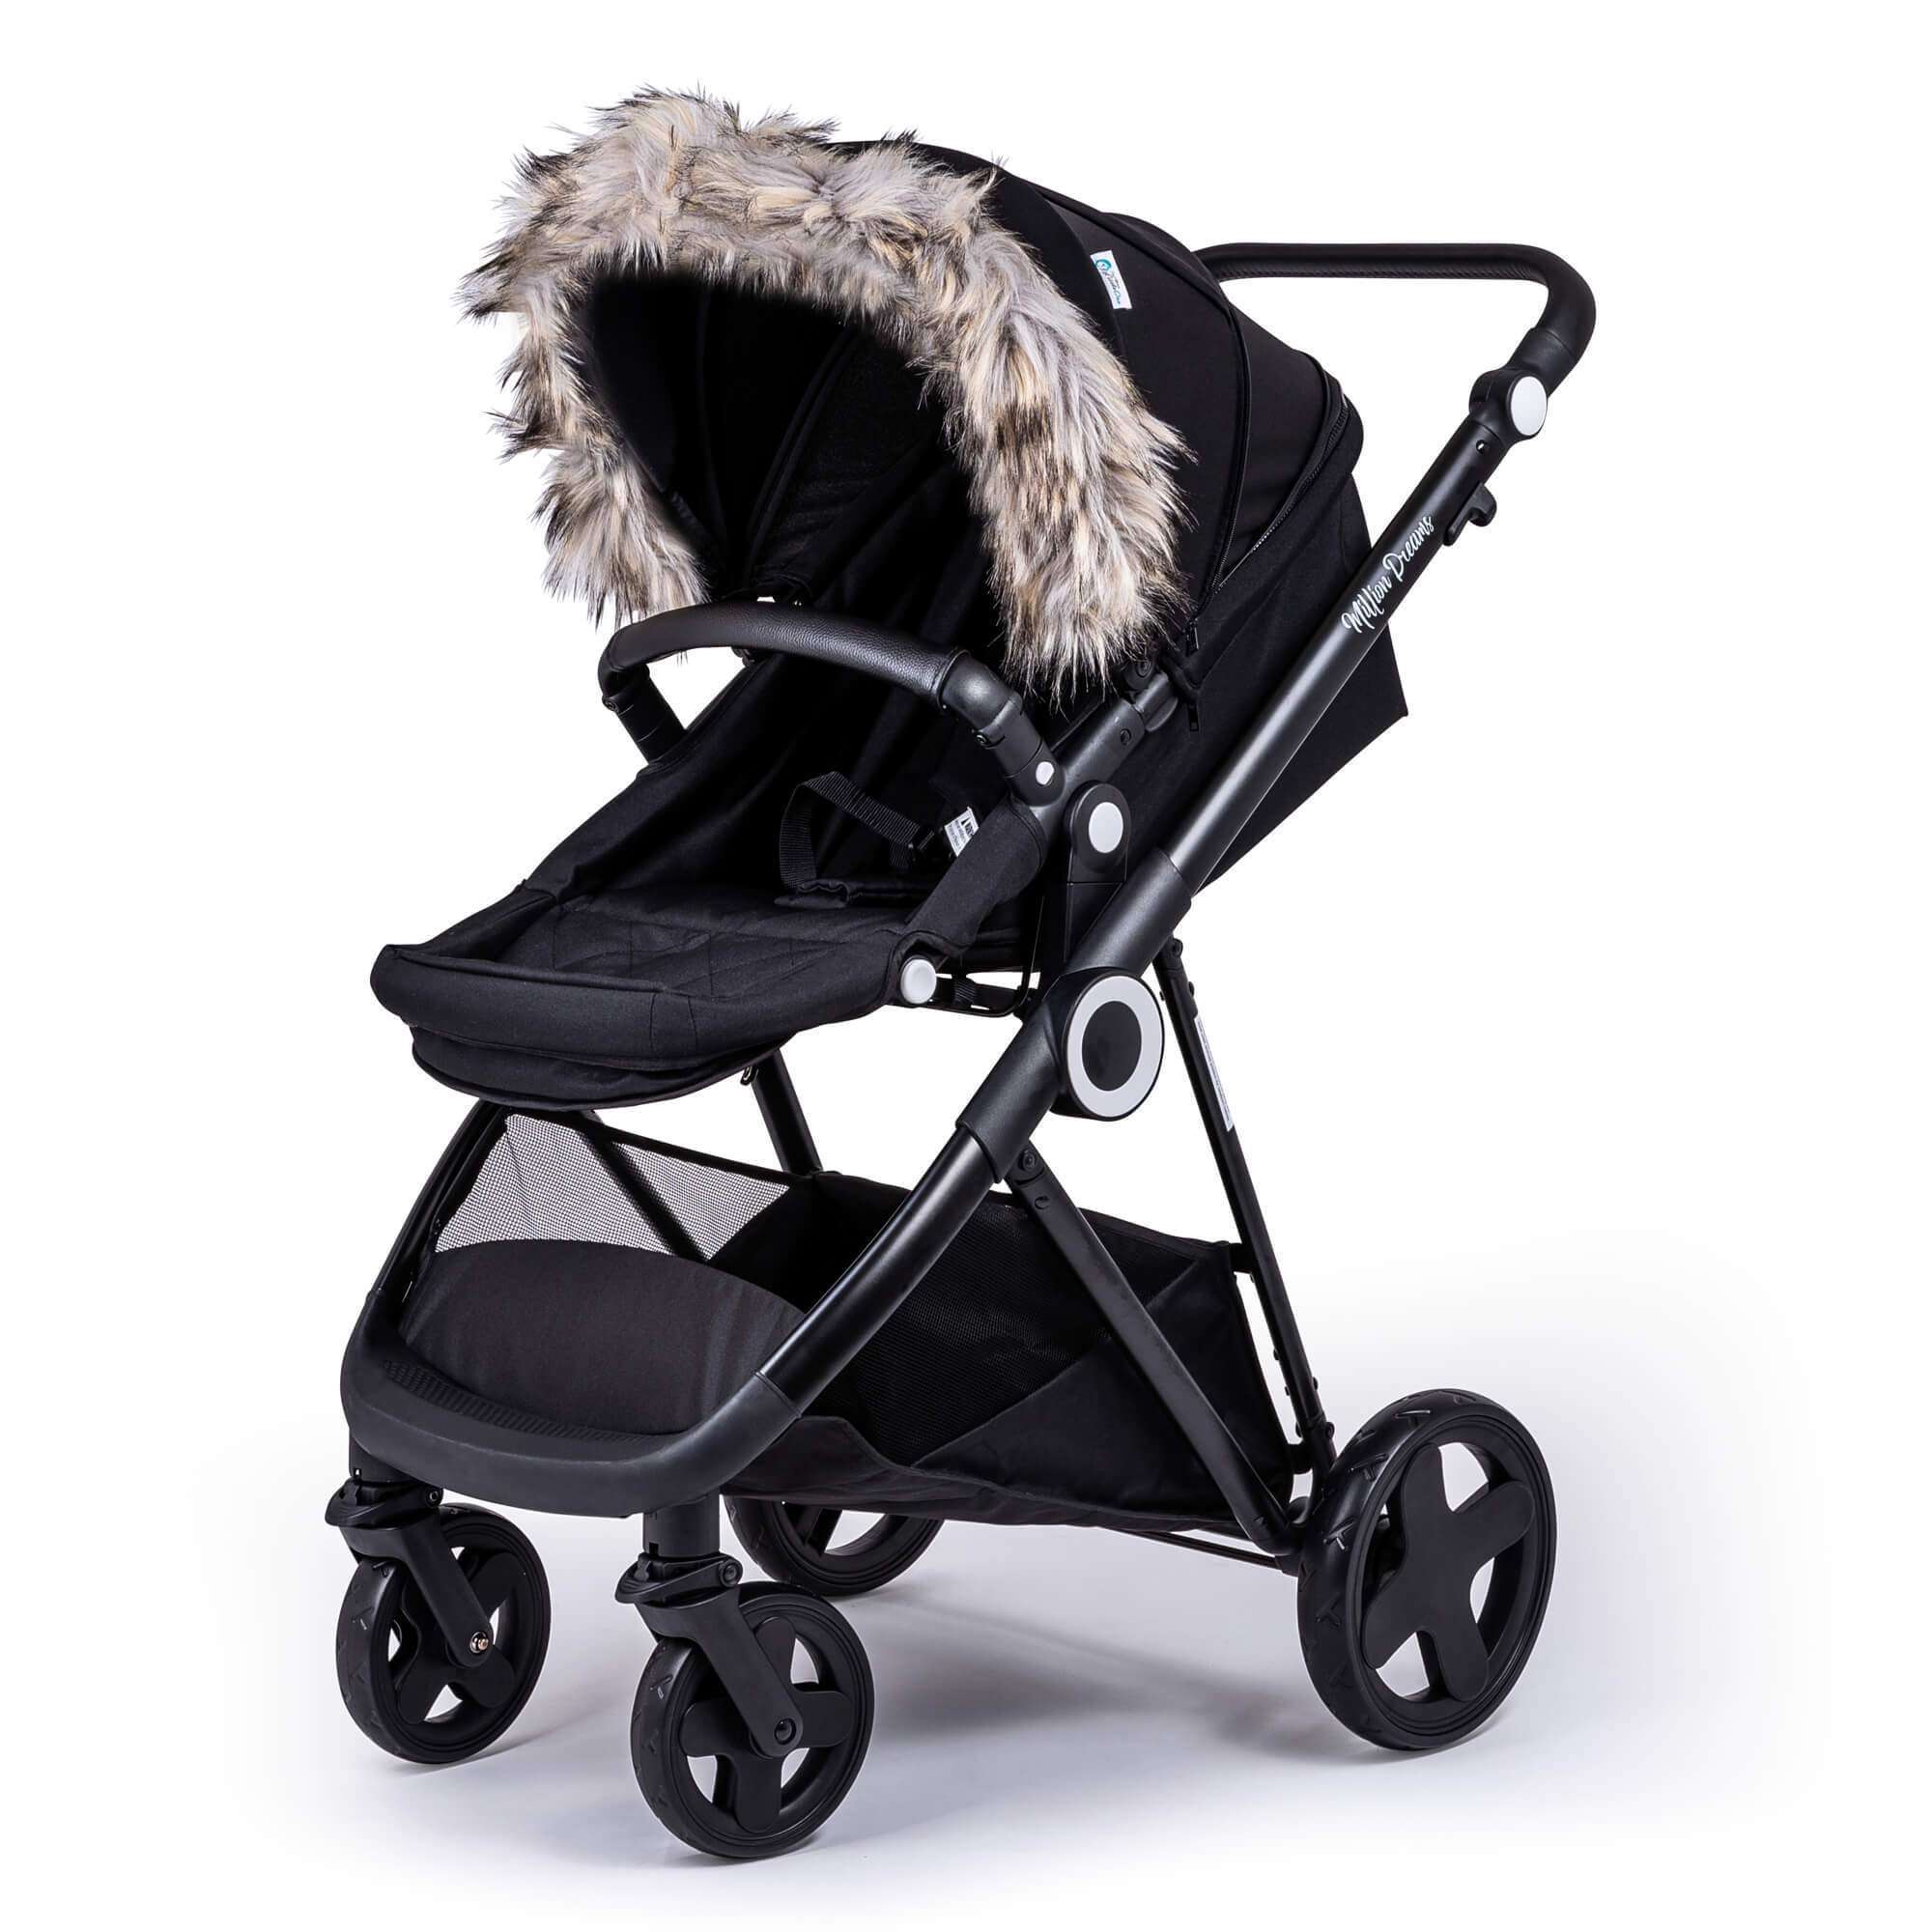 Pram Fur Hood Trim Attachment for Pushchair Compatible with Brevi - Light Grey / Fits All Models | For Your Little One